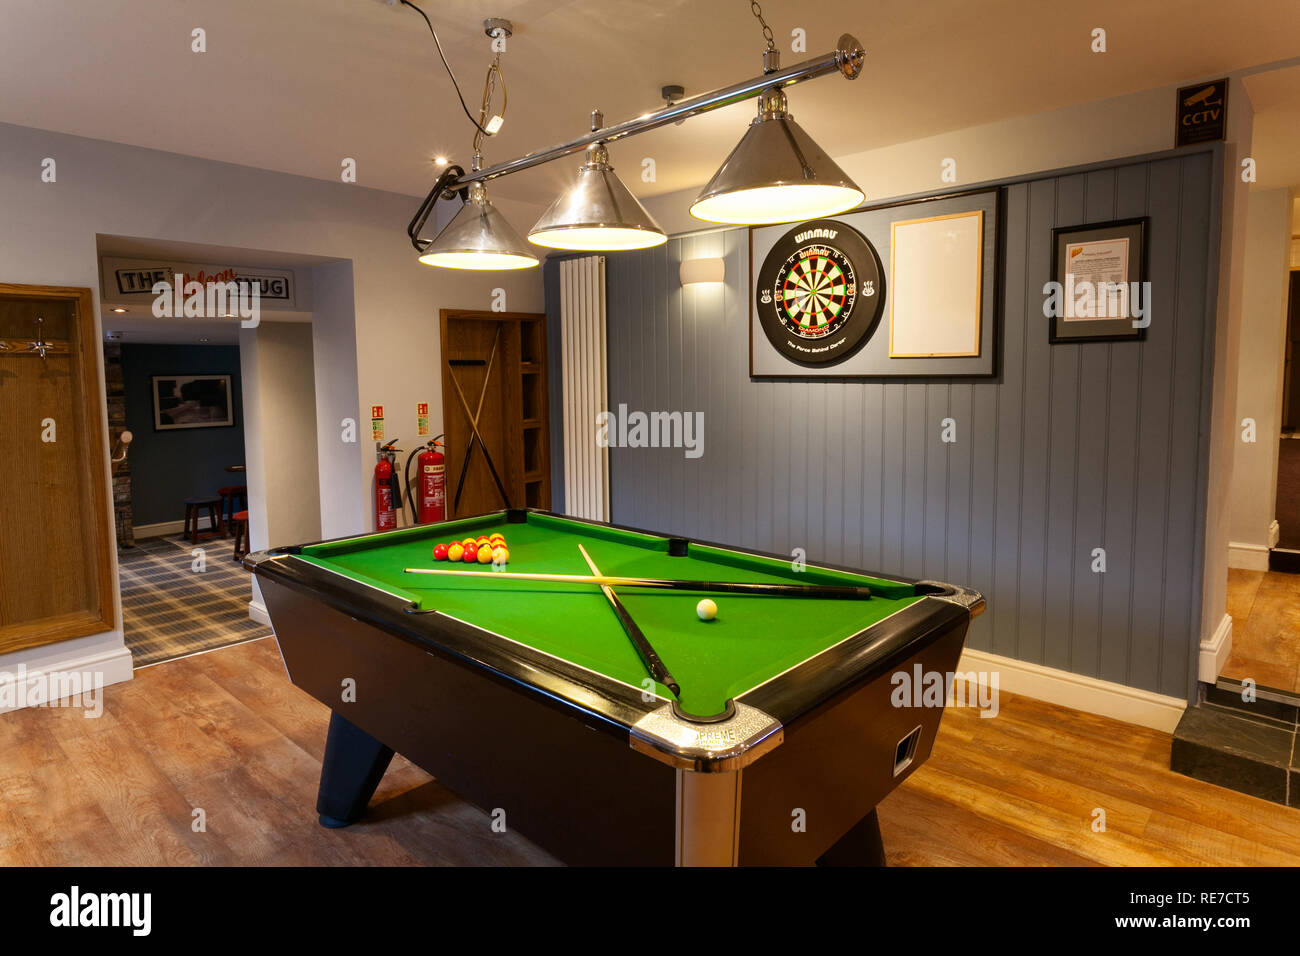 The Nelthorpe Arms pub in South Ferriby, North Lincolnshire, UK Stock Photo